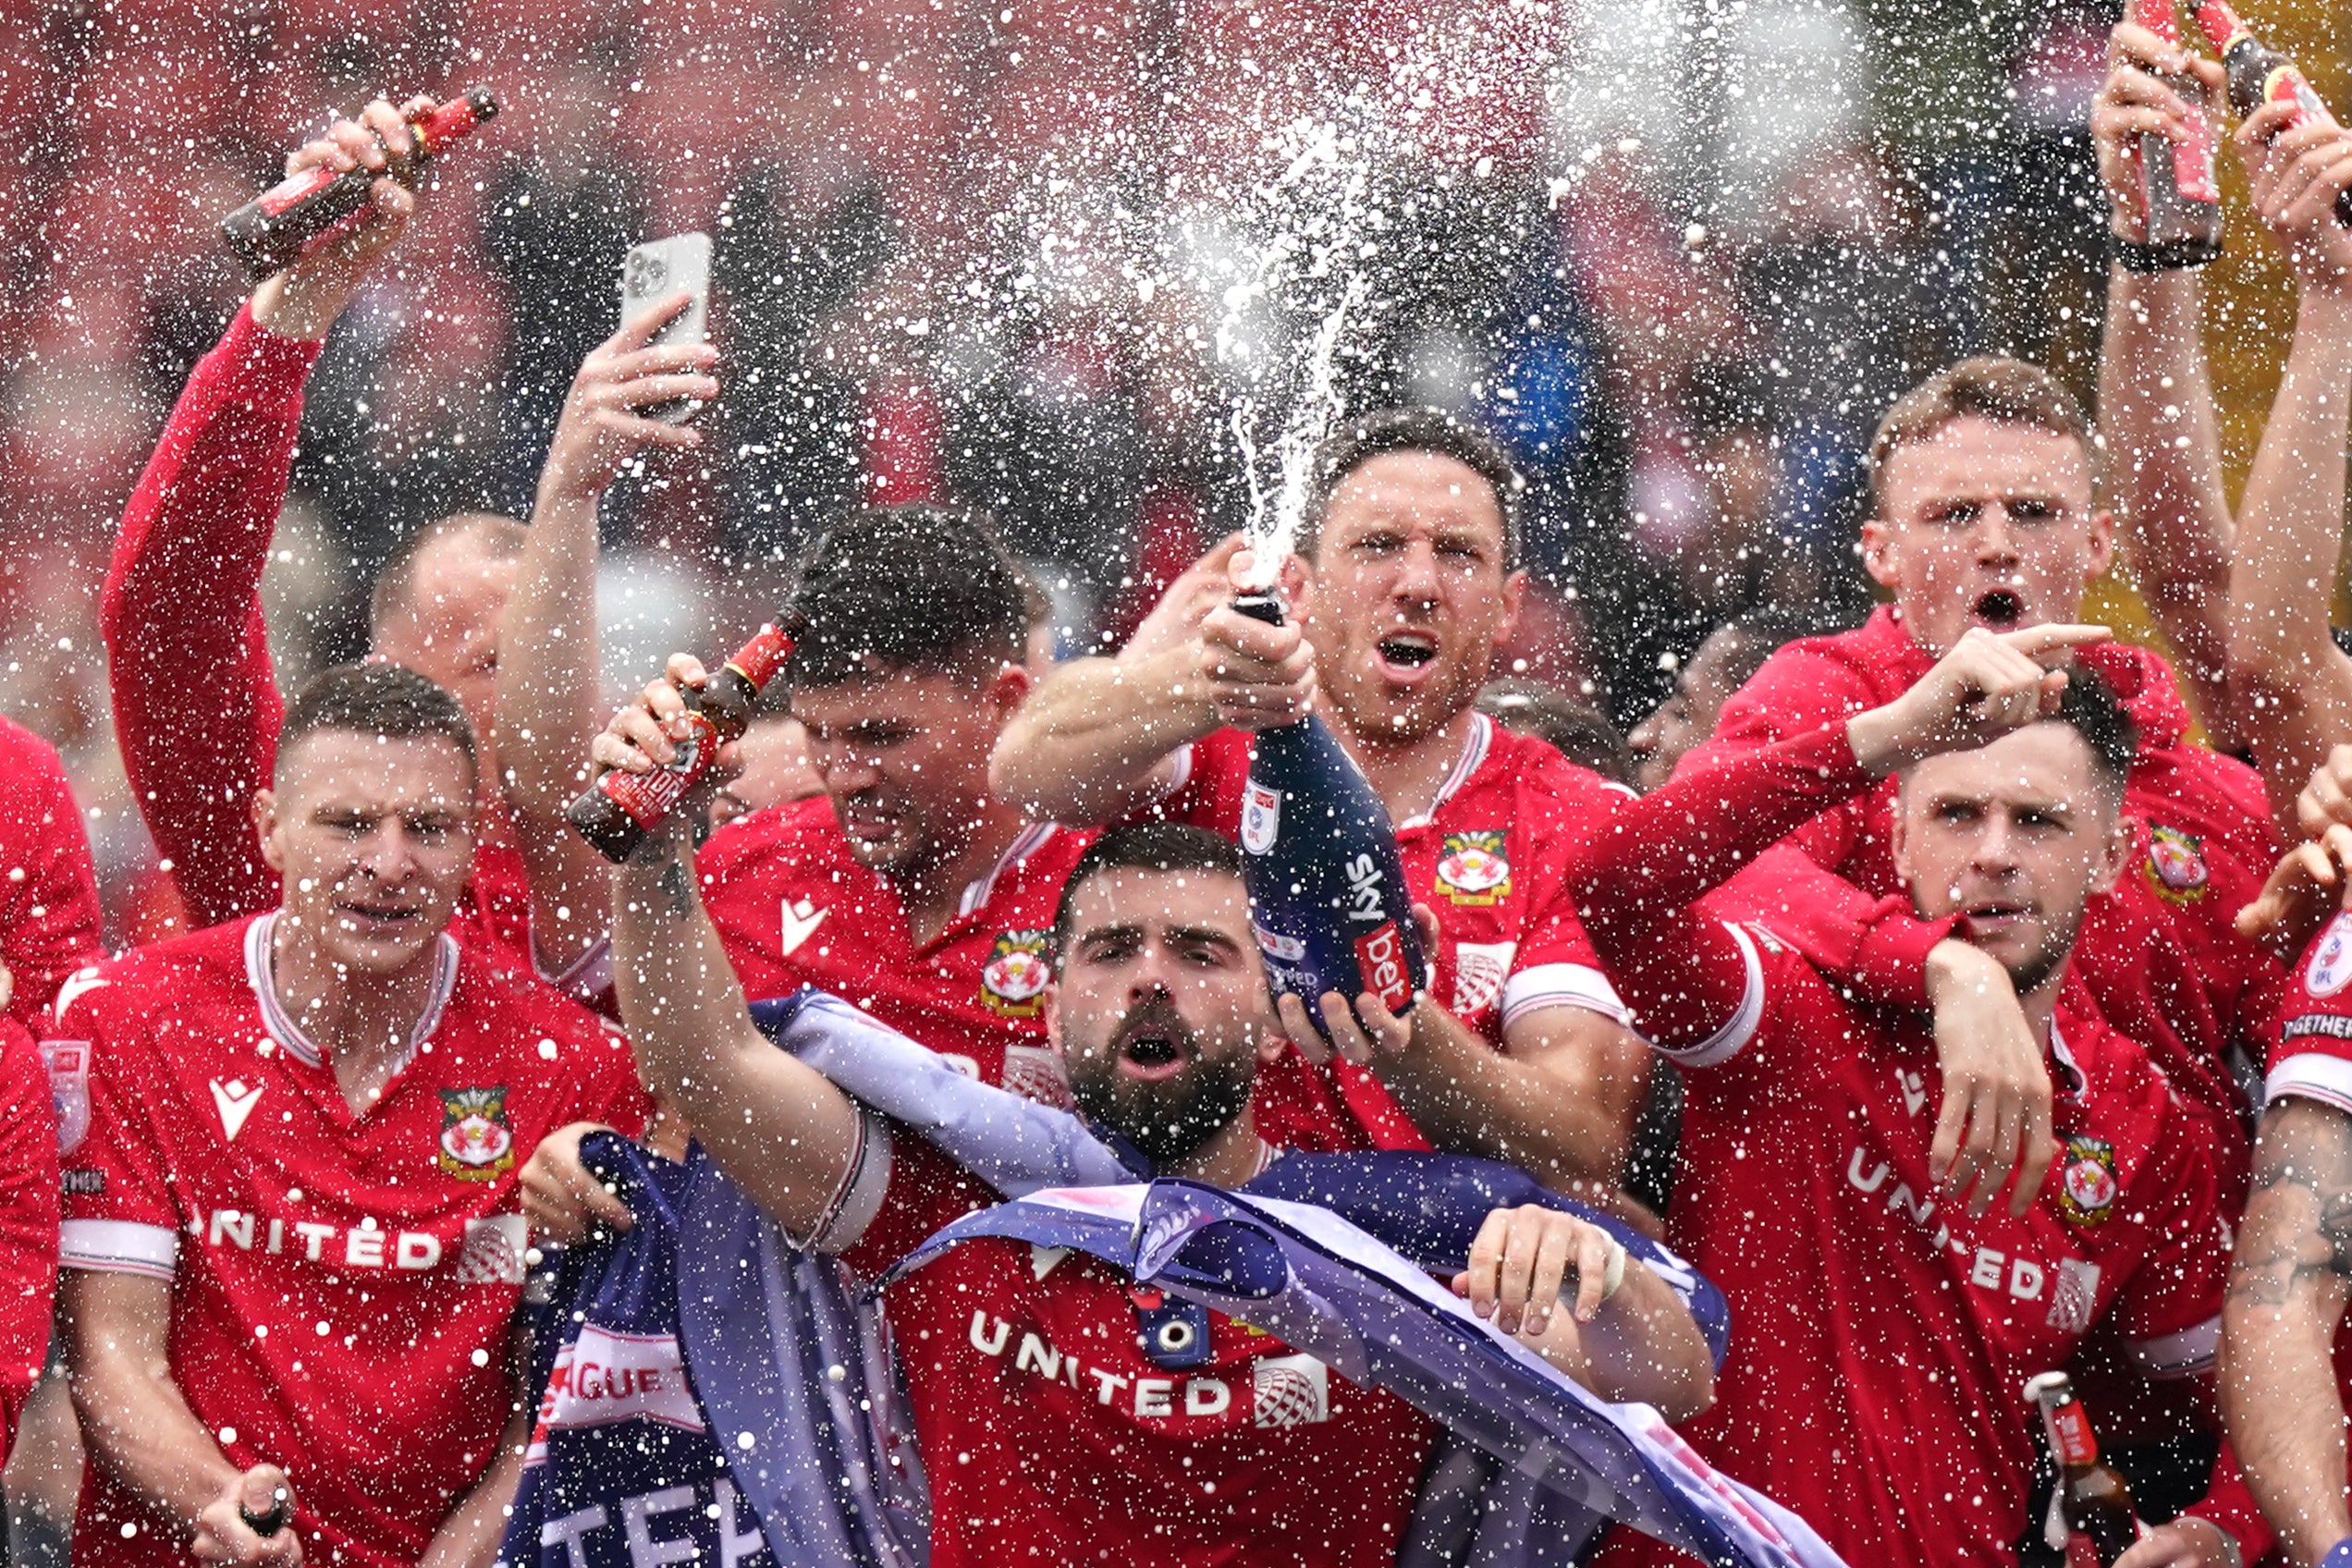 Wrexham have been promoted to League One